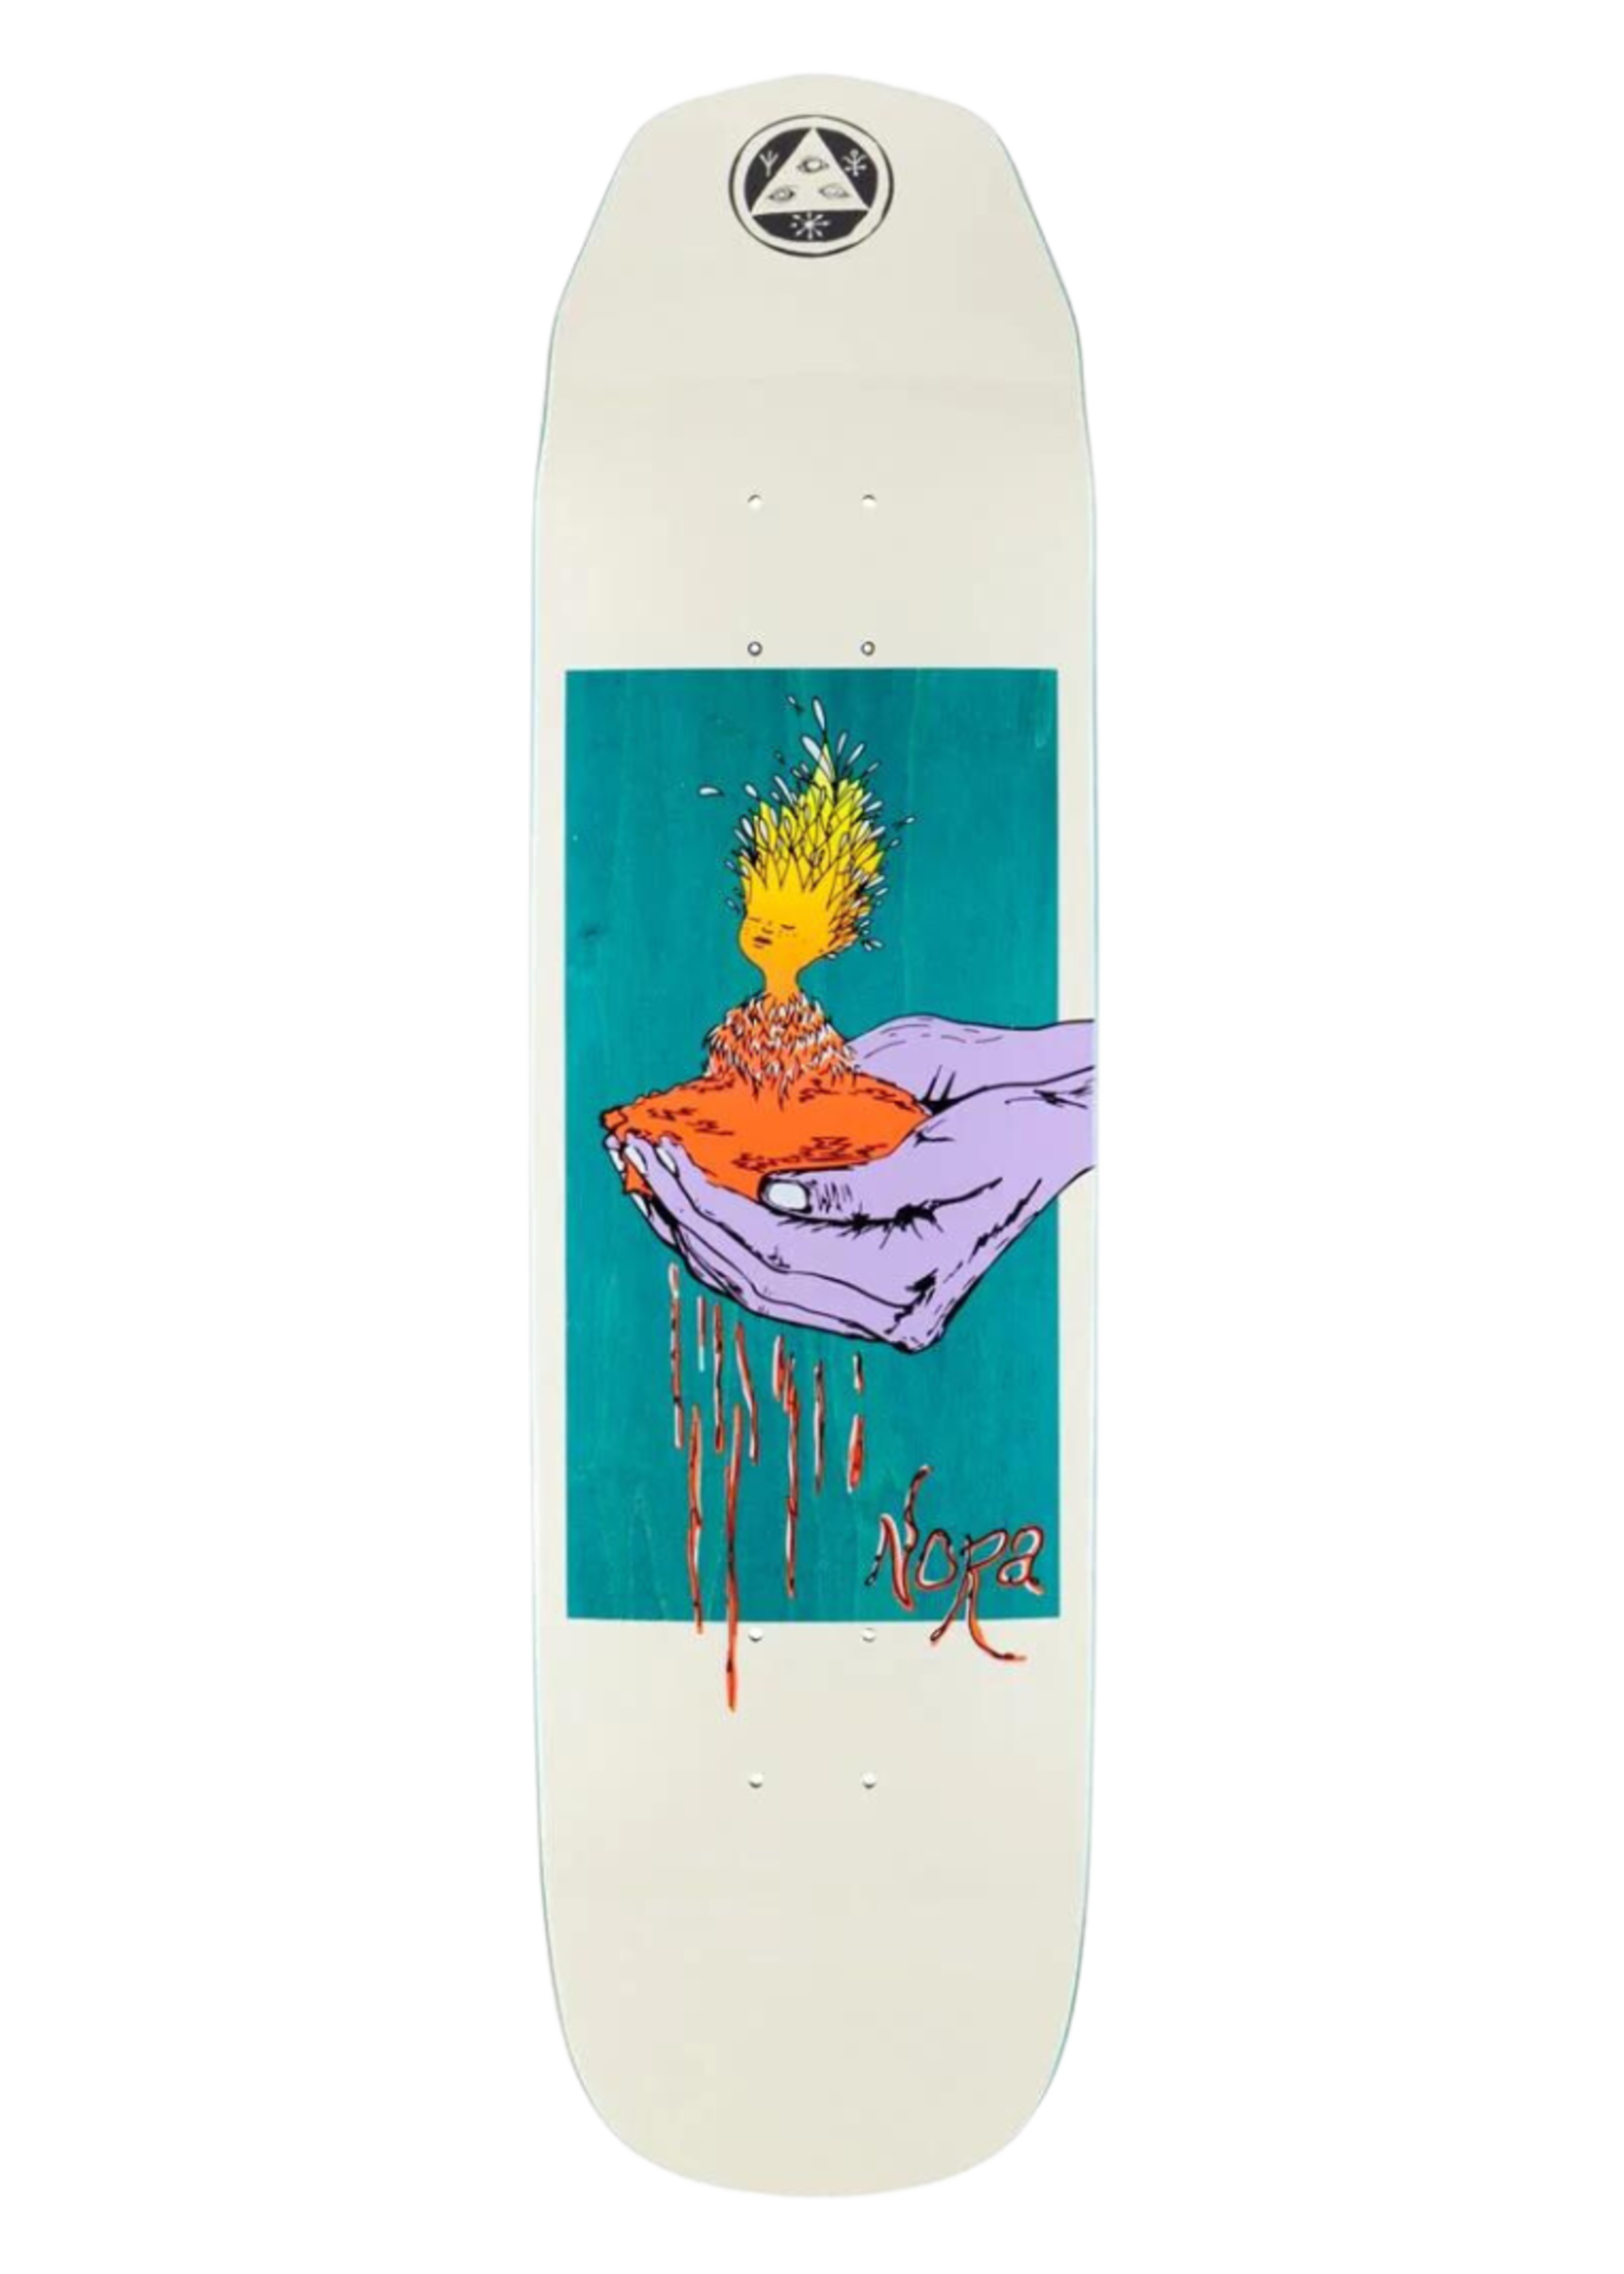 WELCOME NORA VASCONCELLOS SOIL ON WICKED PRINCESS 8.275" DECK